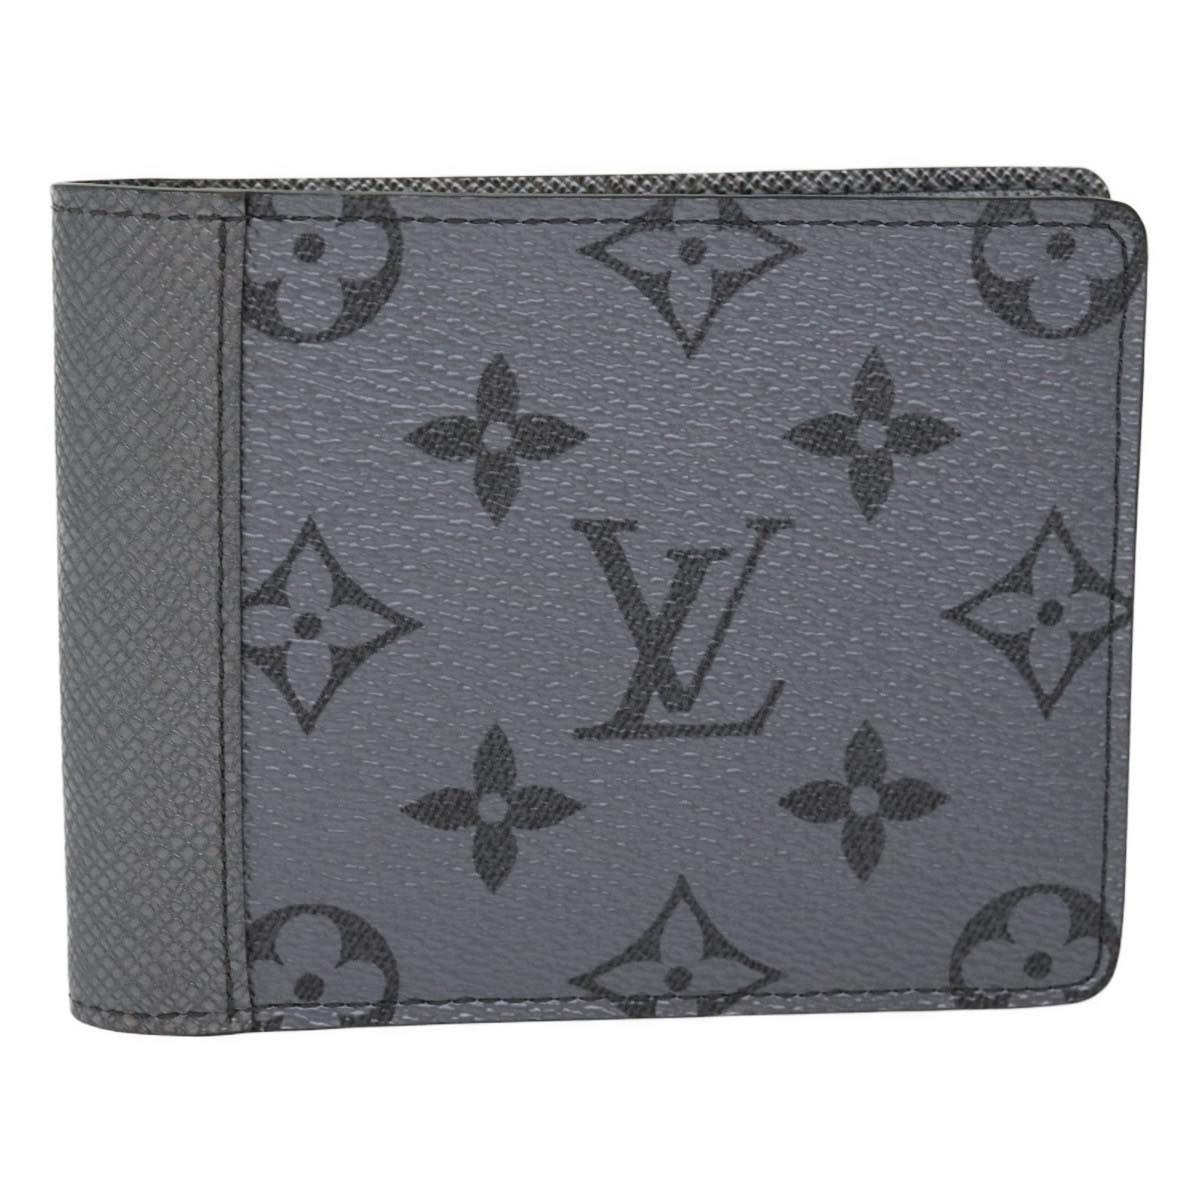 LOUIS VUITTON Taigalama Portefeuille Multipull Wallet Silver M30843 Auth 30046A - 0